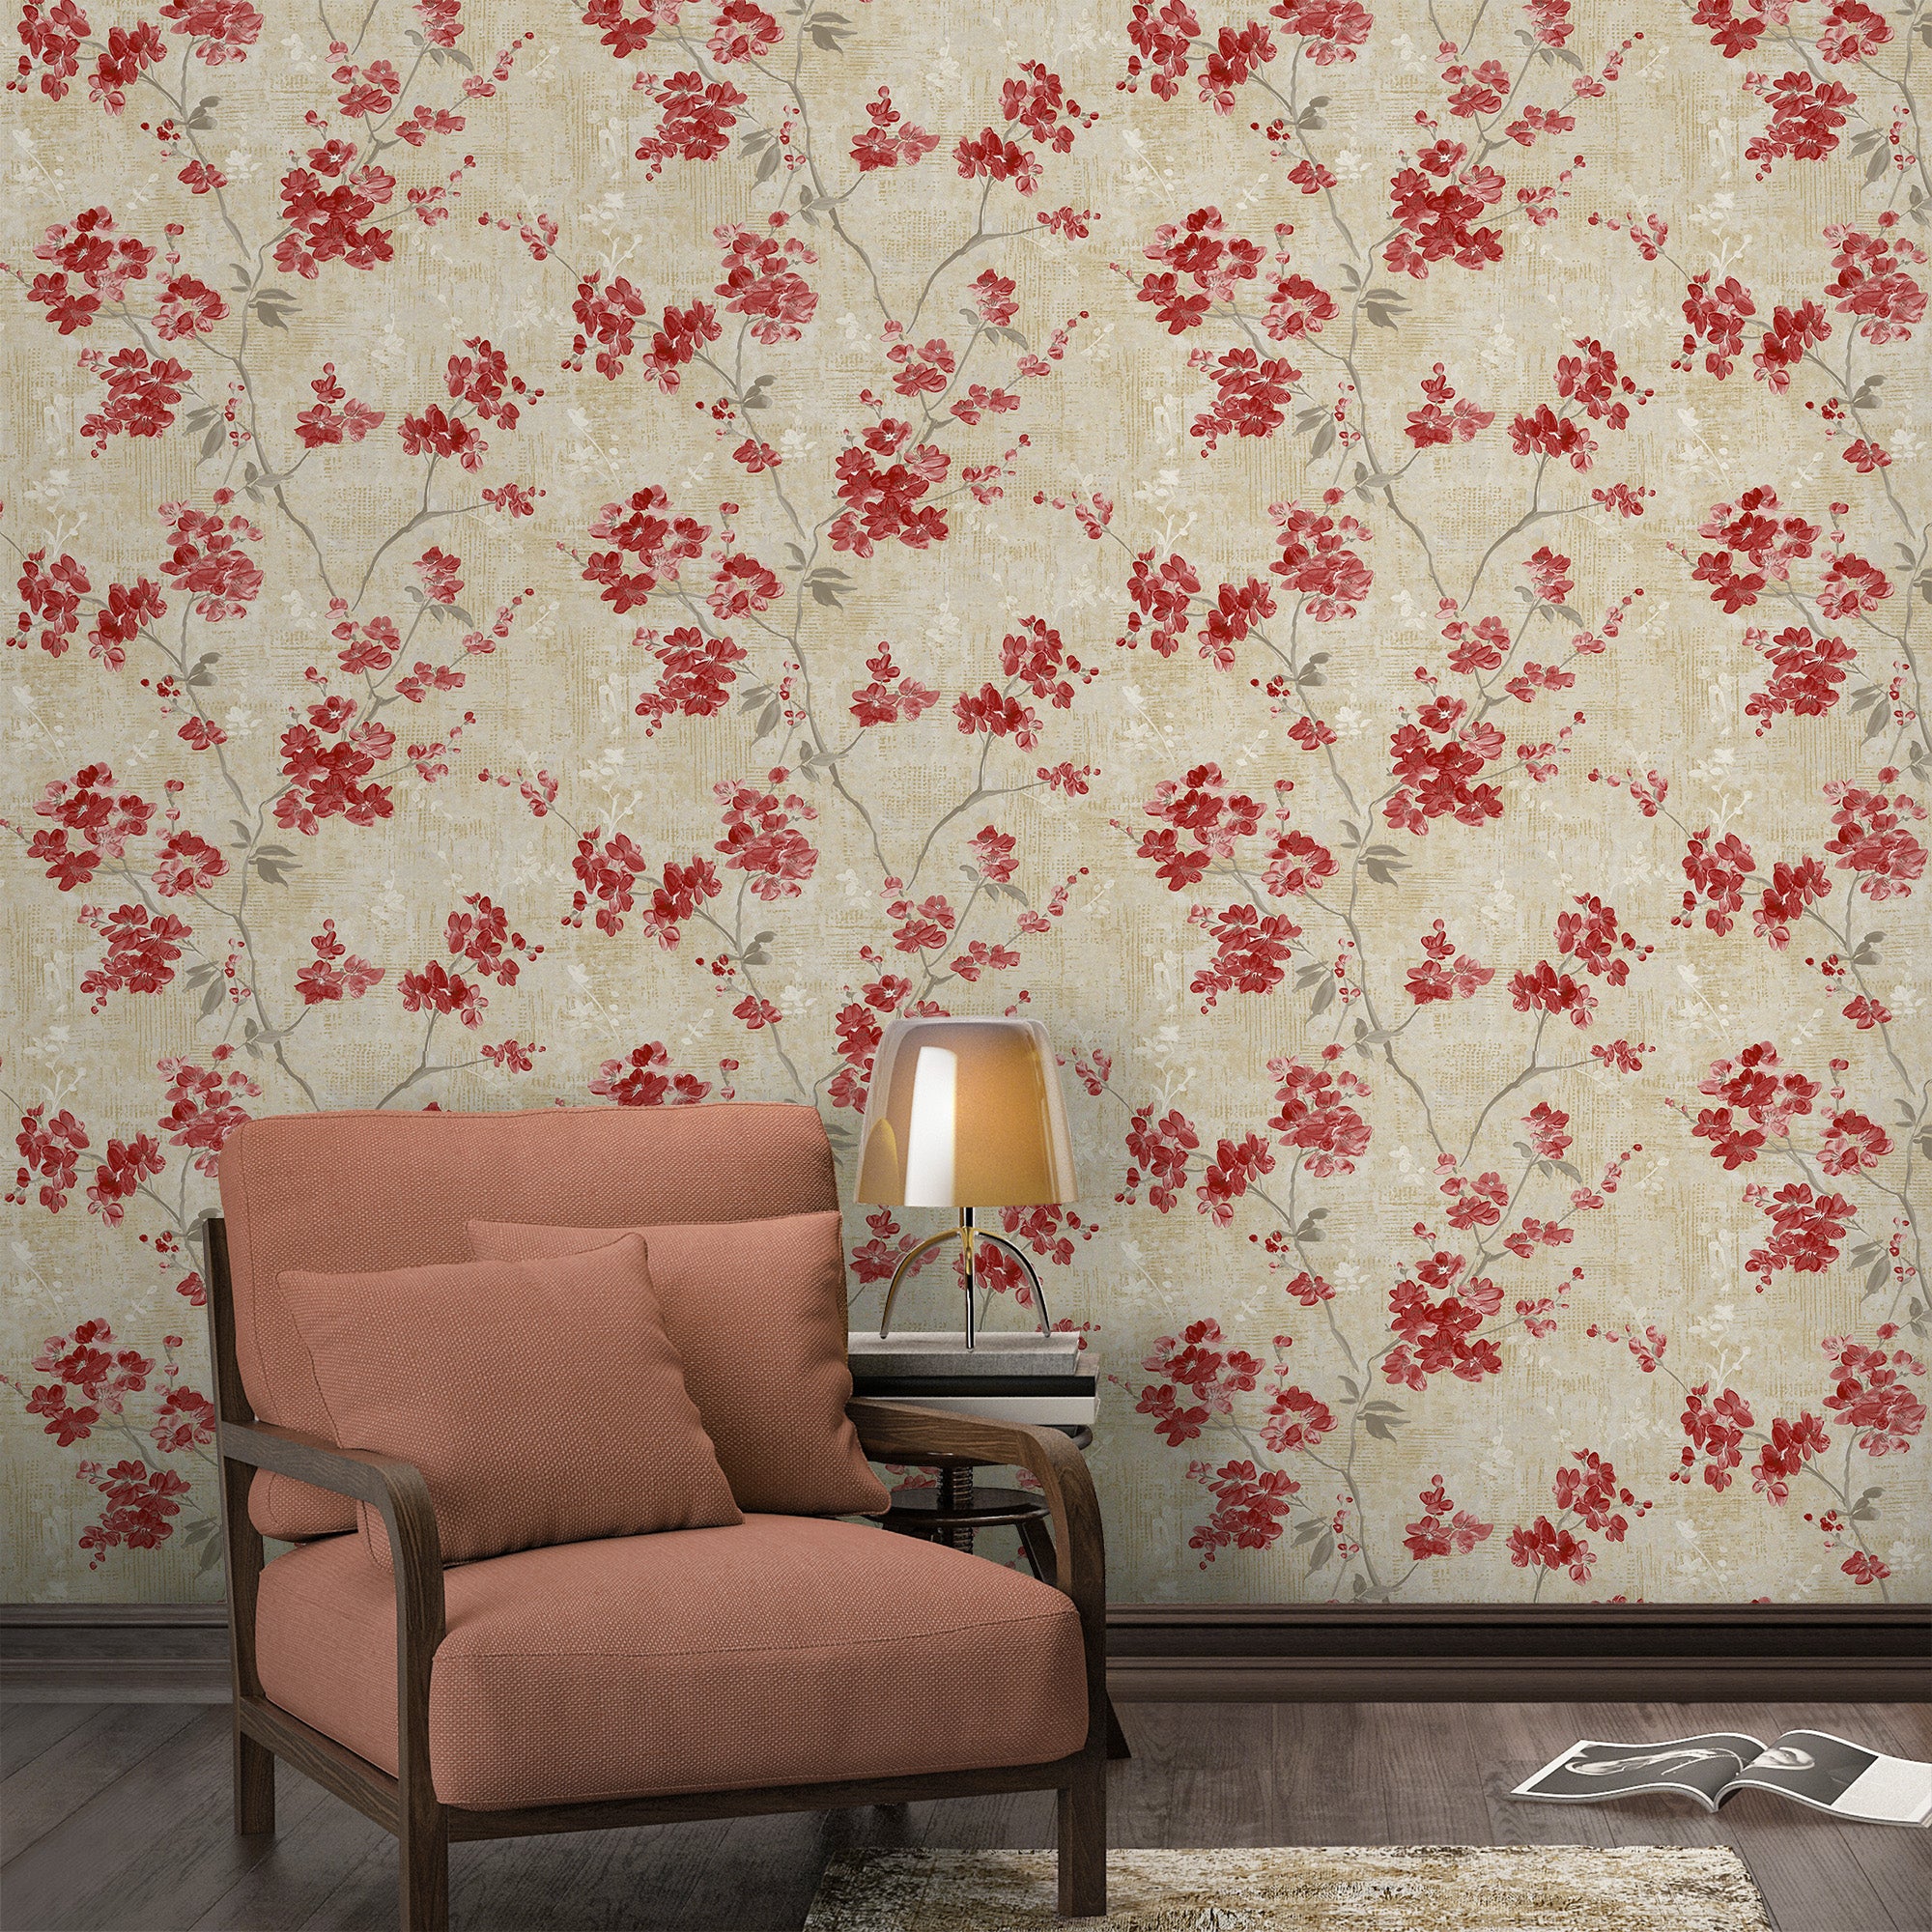 Paul Moneypenny Anethe Blossom Red | Grandeco | A72304